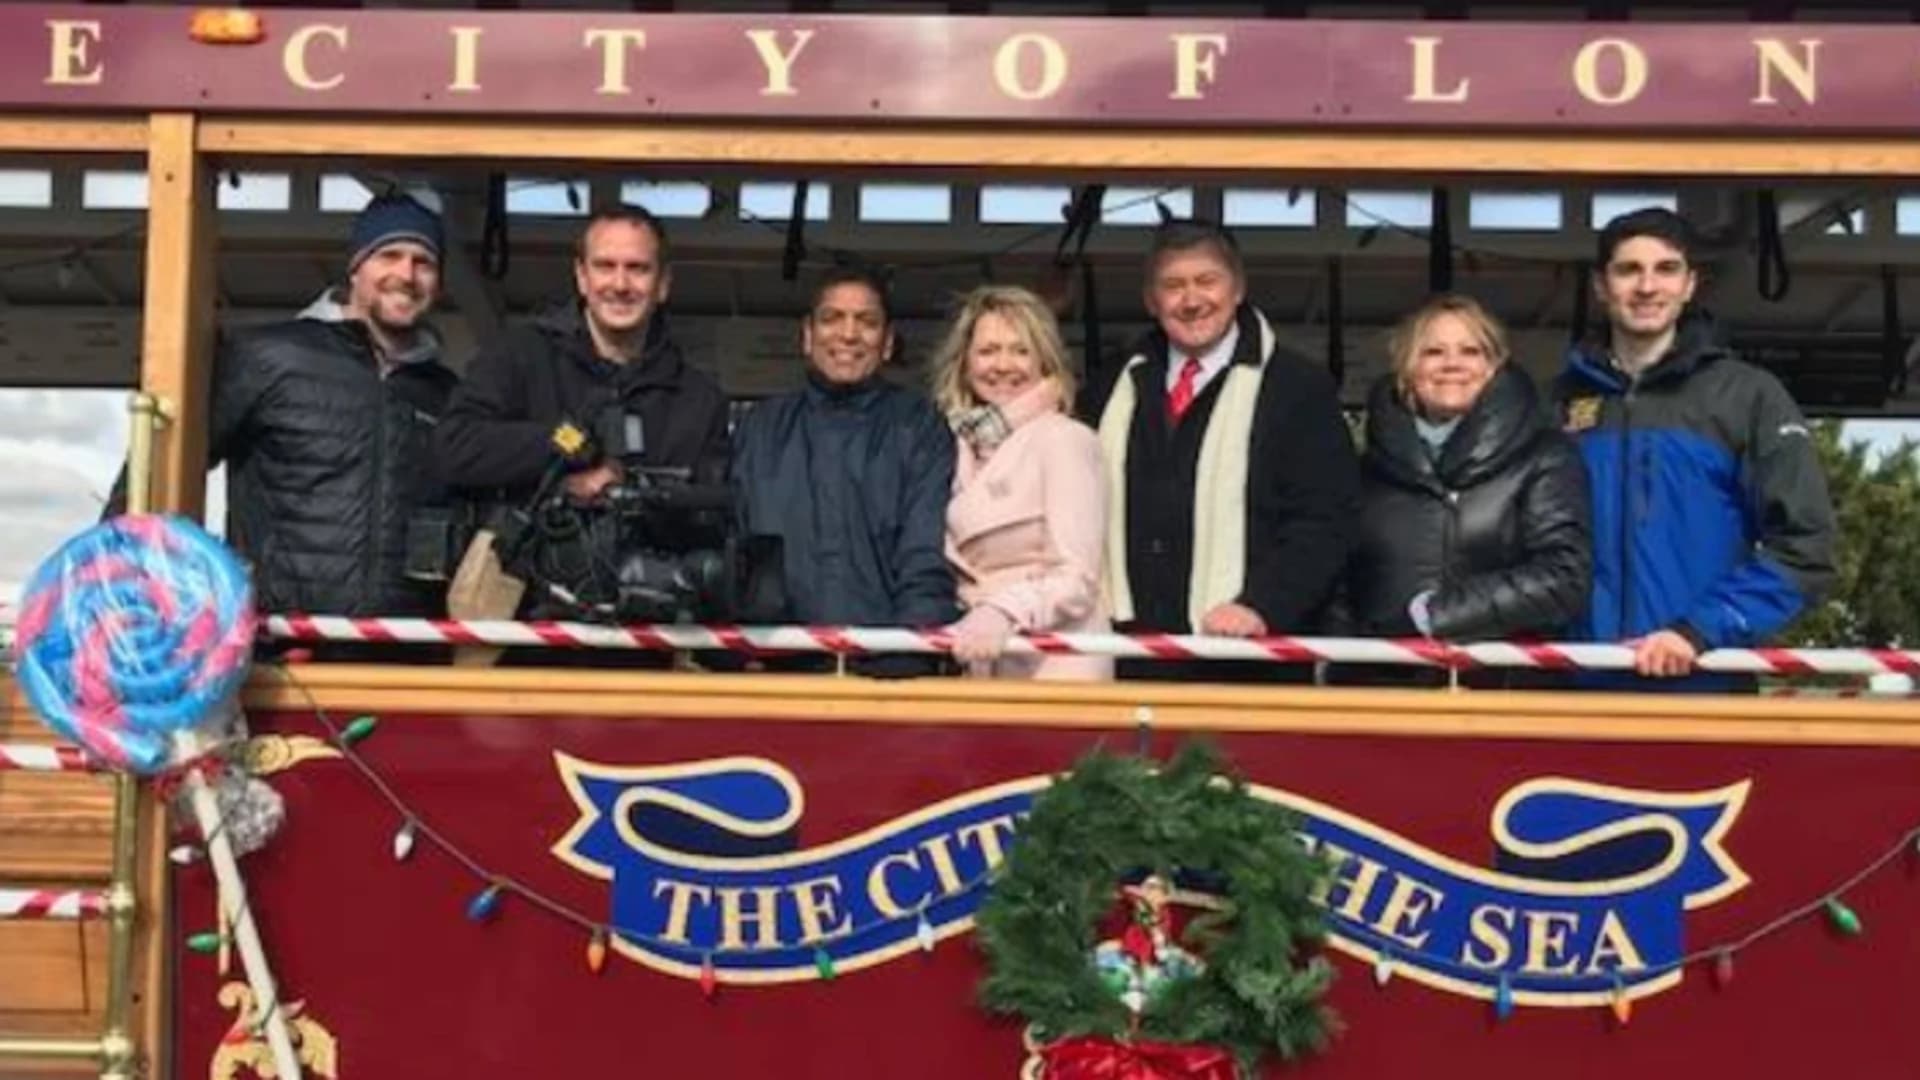 Behind the scenes of Christmas on Long Island